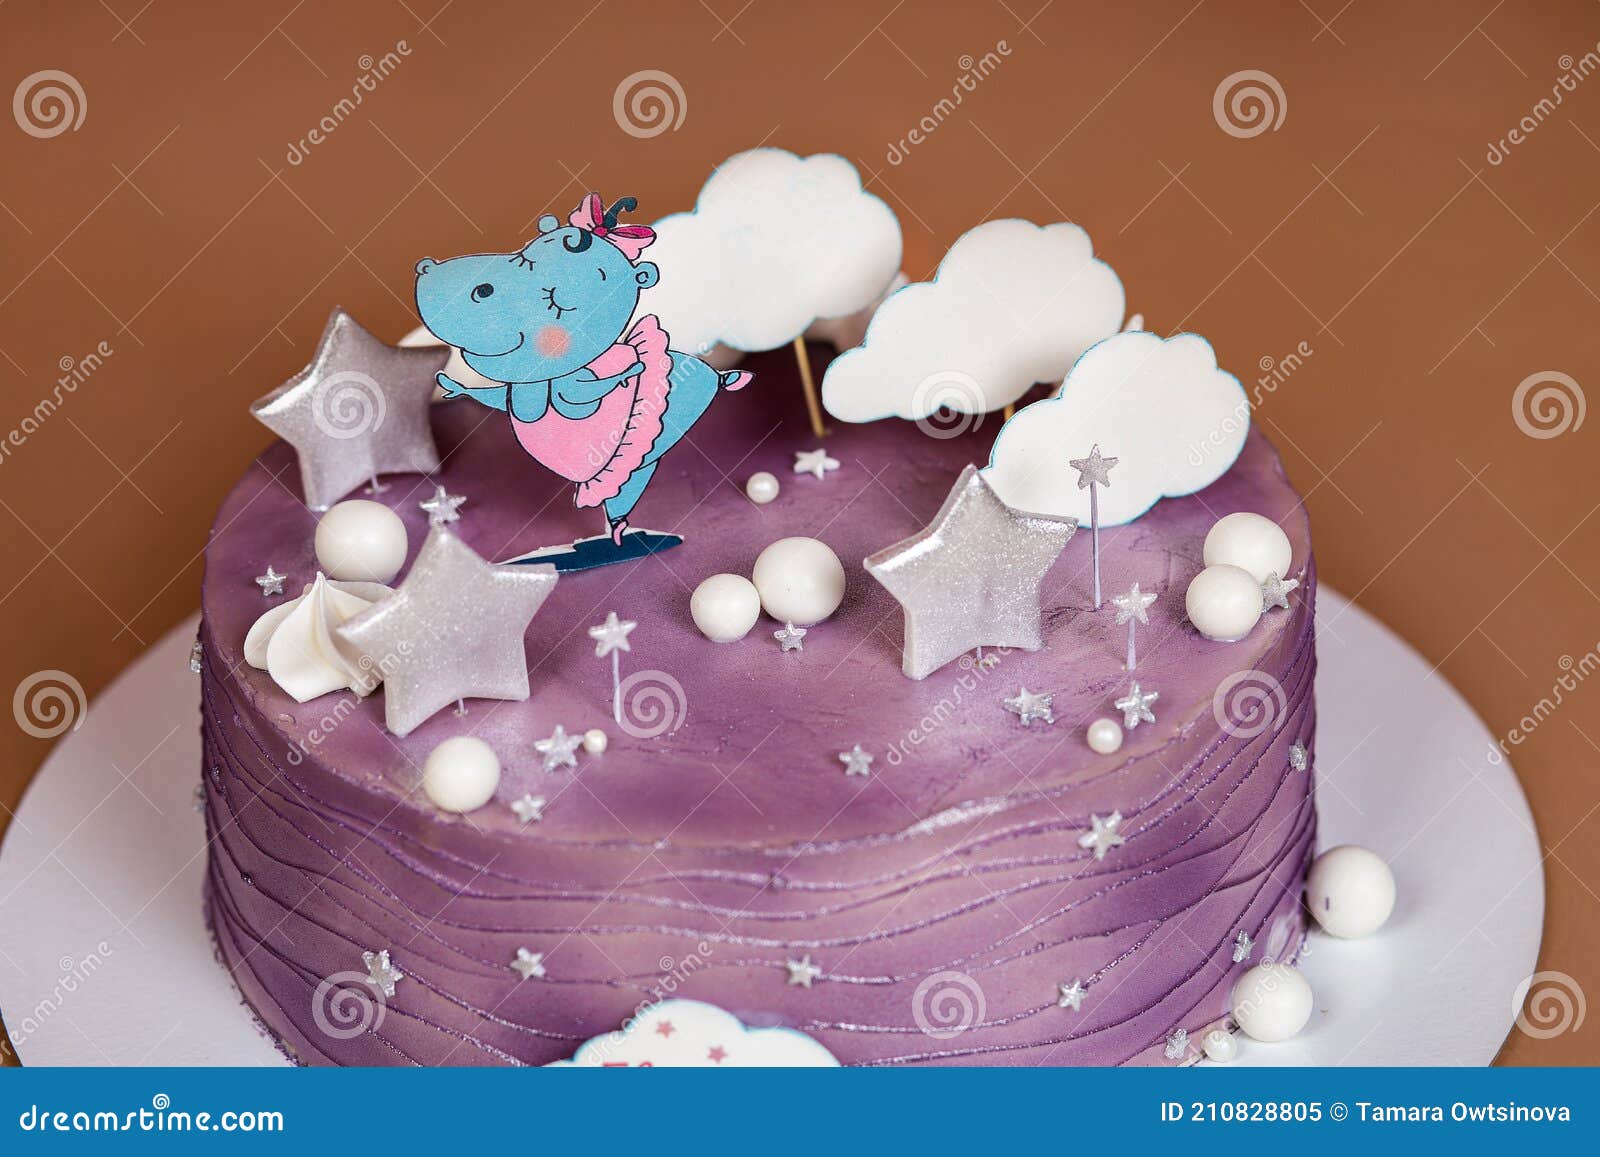 Rainbow Theme Cake with Clouds by Creme Castle